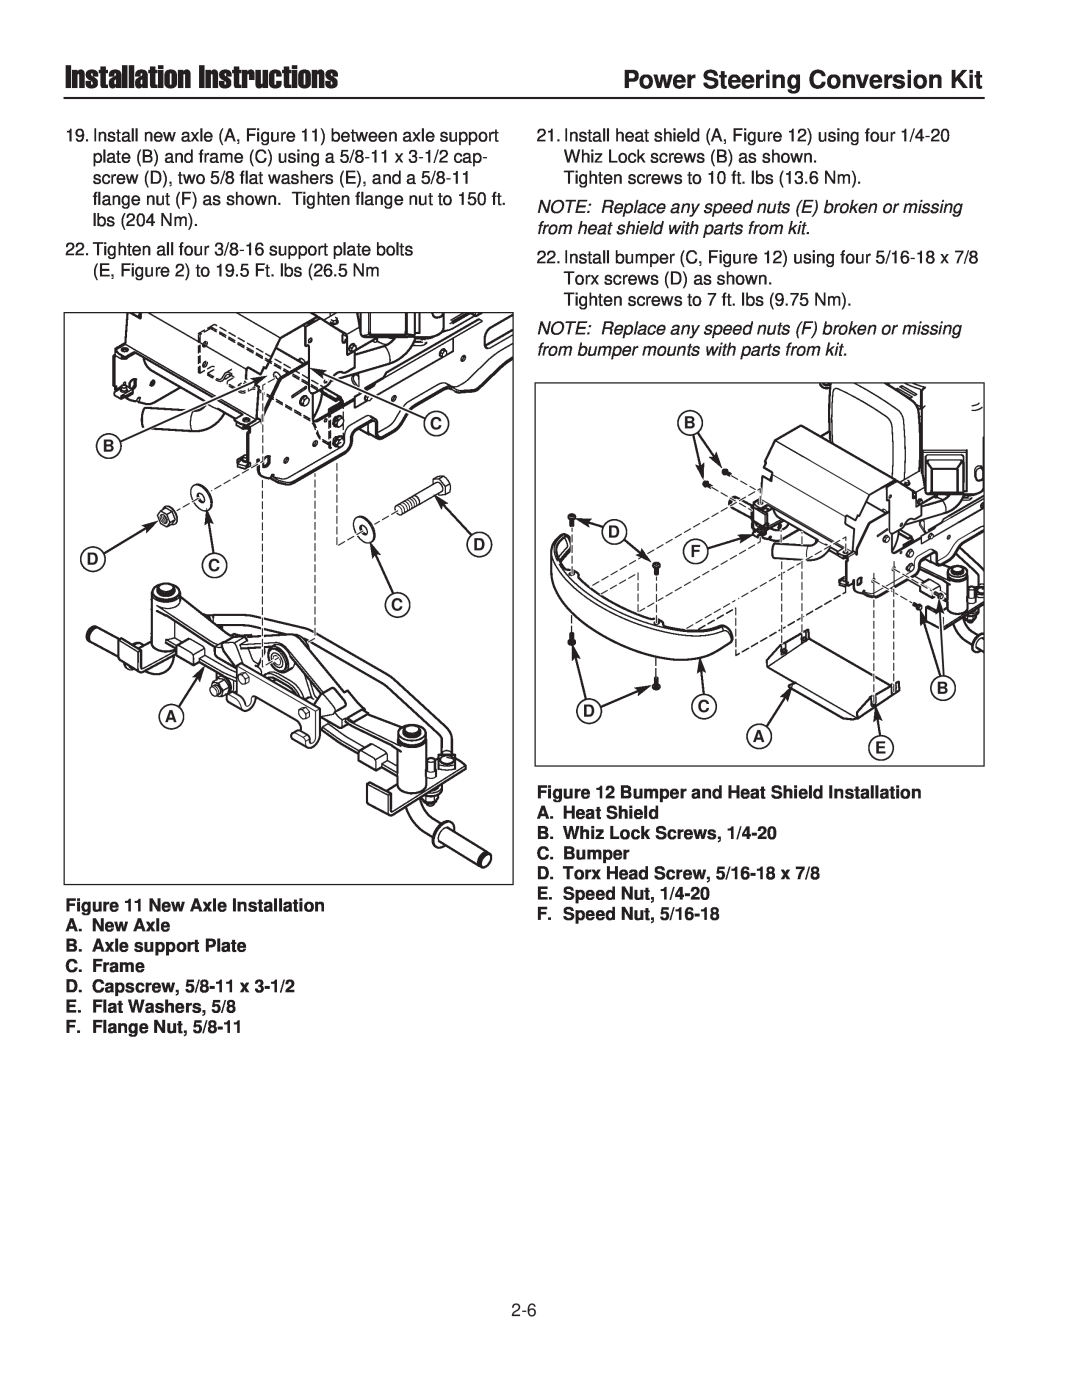 Briggs & Stratton 1687286 Installation Instructions, Power Steering Conversion Kit, New Axle Installation A.New Axle 